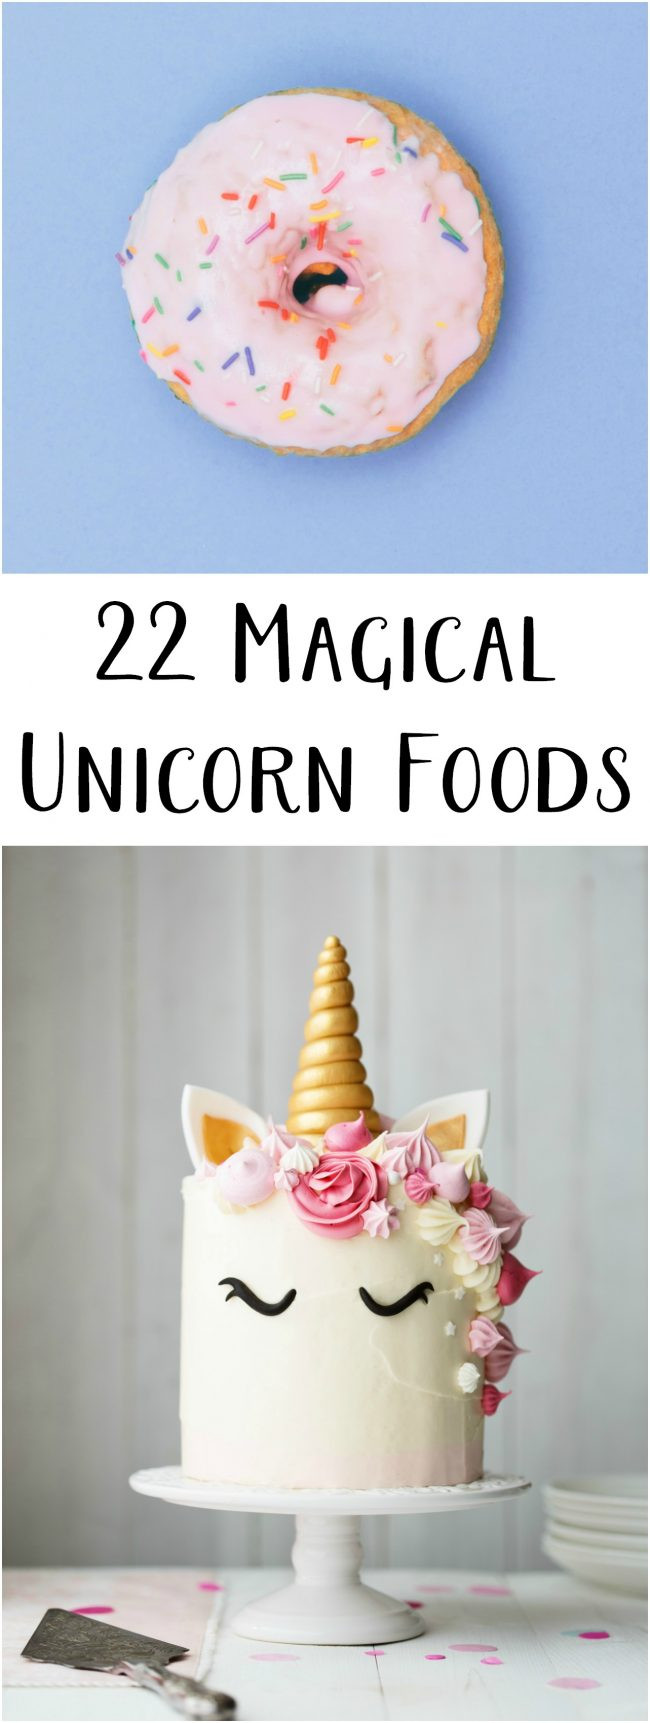 Healthy Unicorn Party Food Ideas
 22 Magical Unicorn Foods Not Quite Susie Homemaker